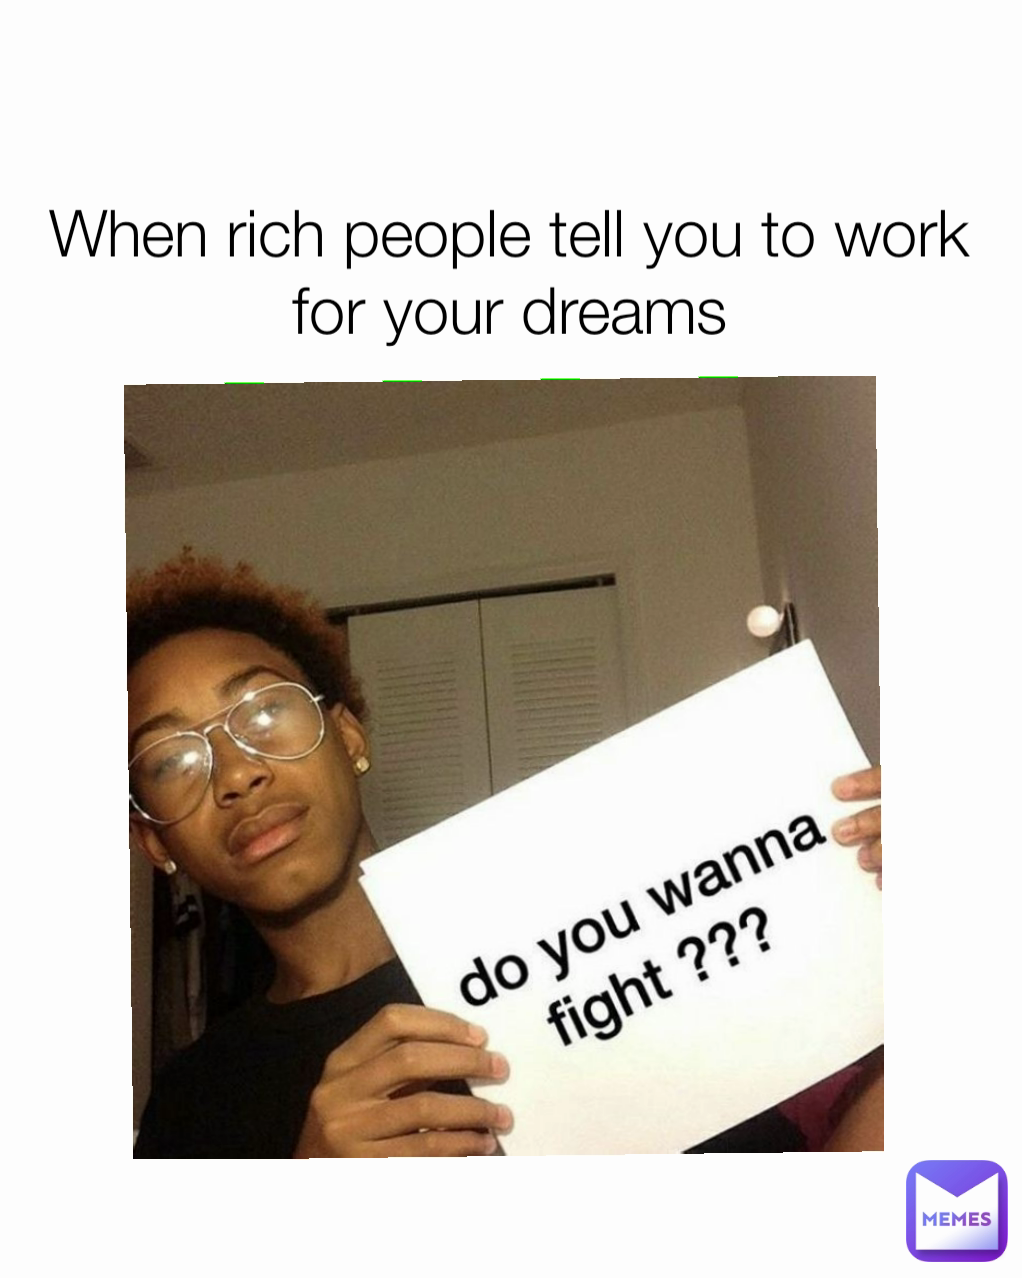 When rich people tell you to work for your dreams